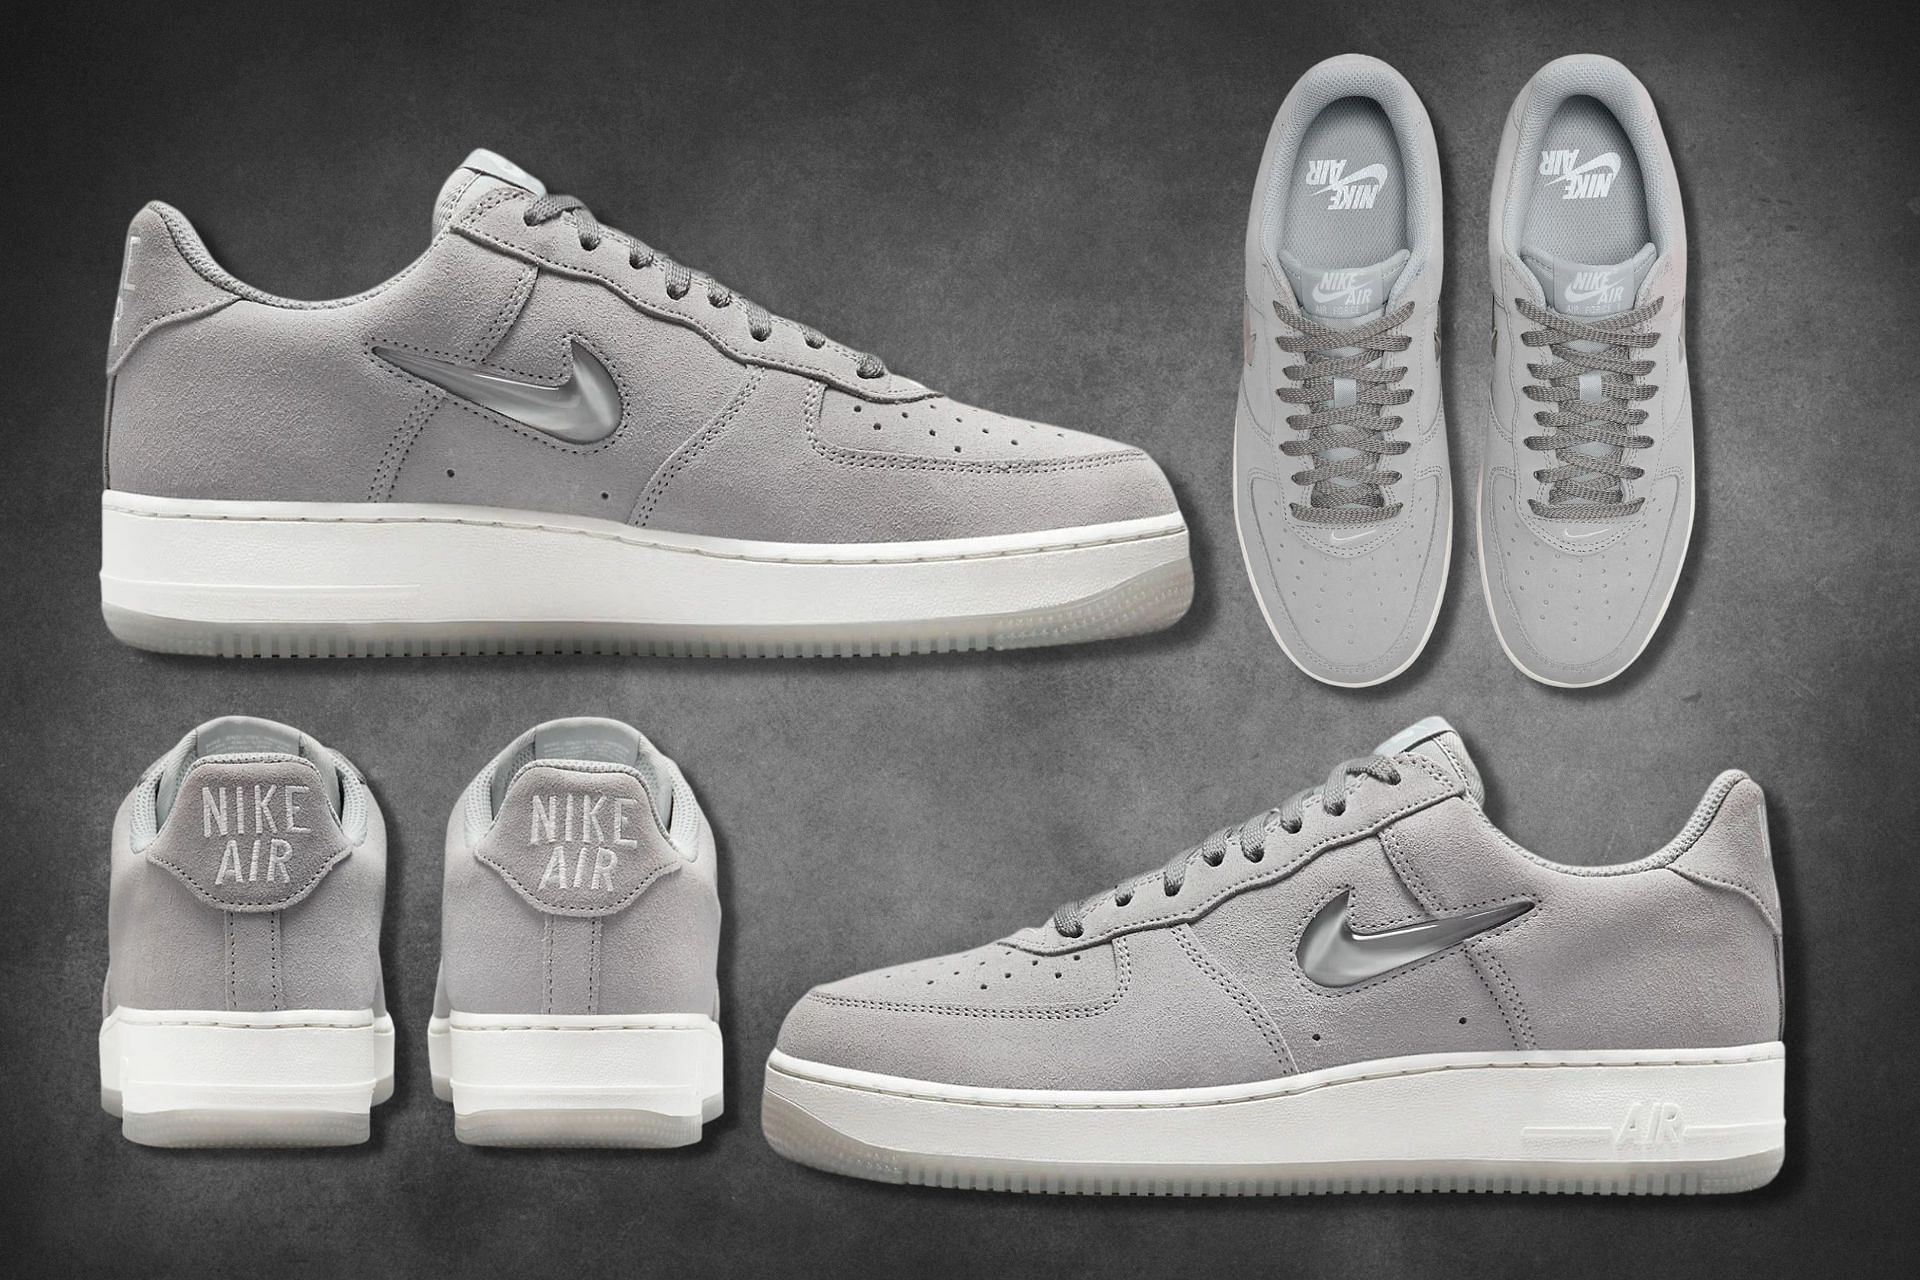 Nike's 'Color of the Month' Air Force 1 Pack Continues